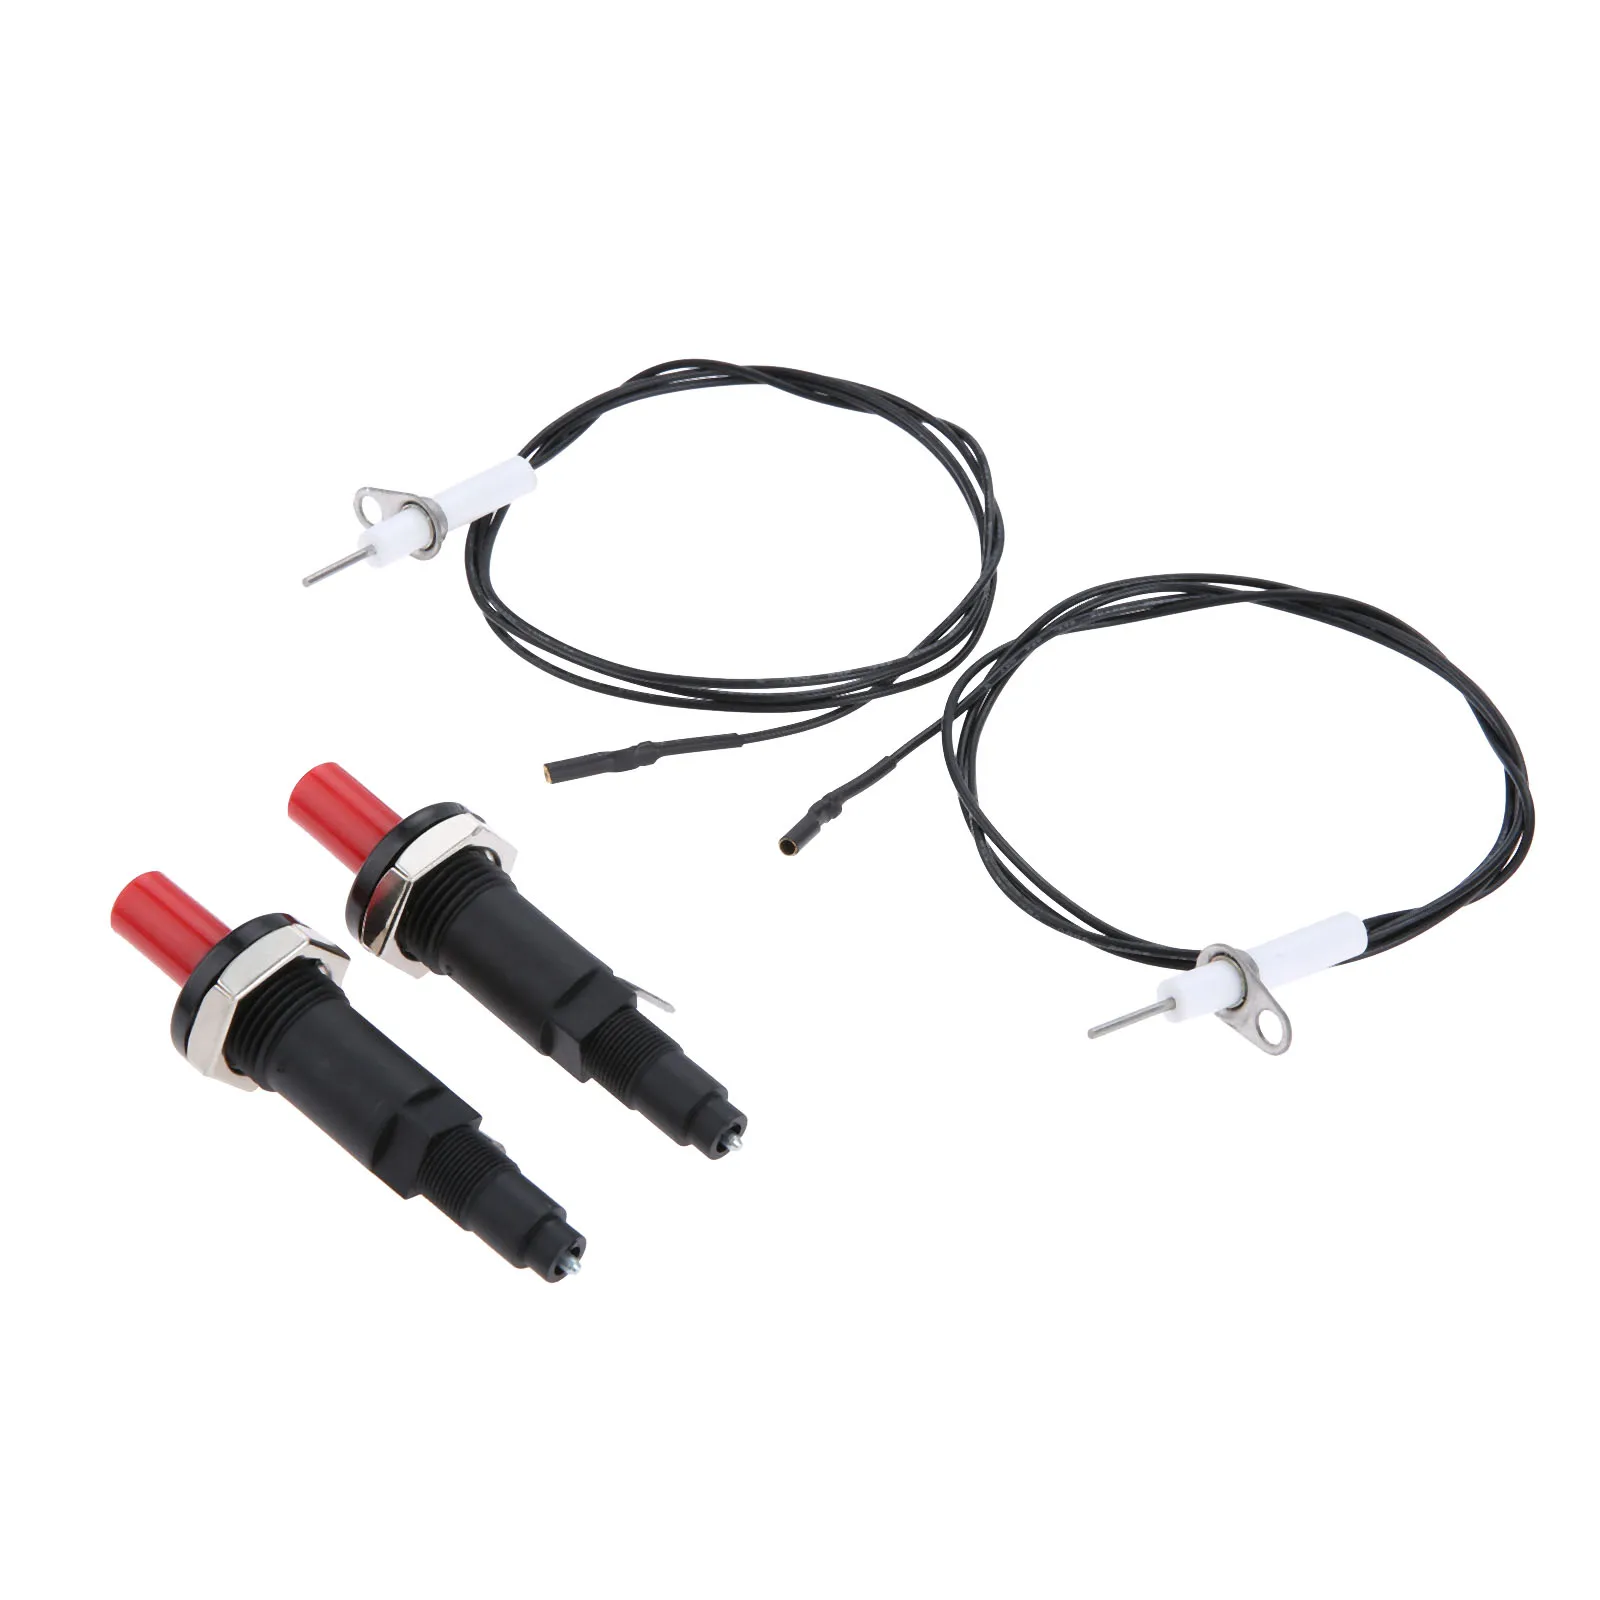 2Pcs x Piezo Spark Ignition Set 1m Wire 200℃ Resistance For Gas Camping Stove 